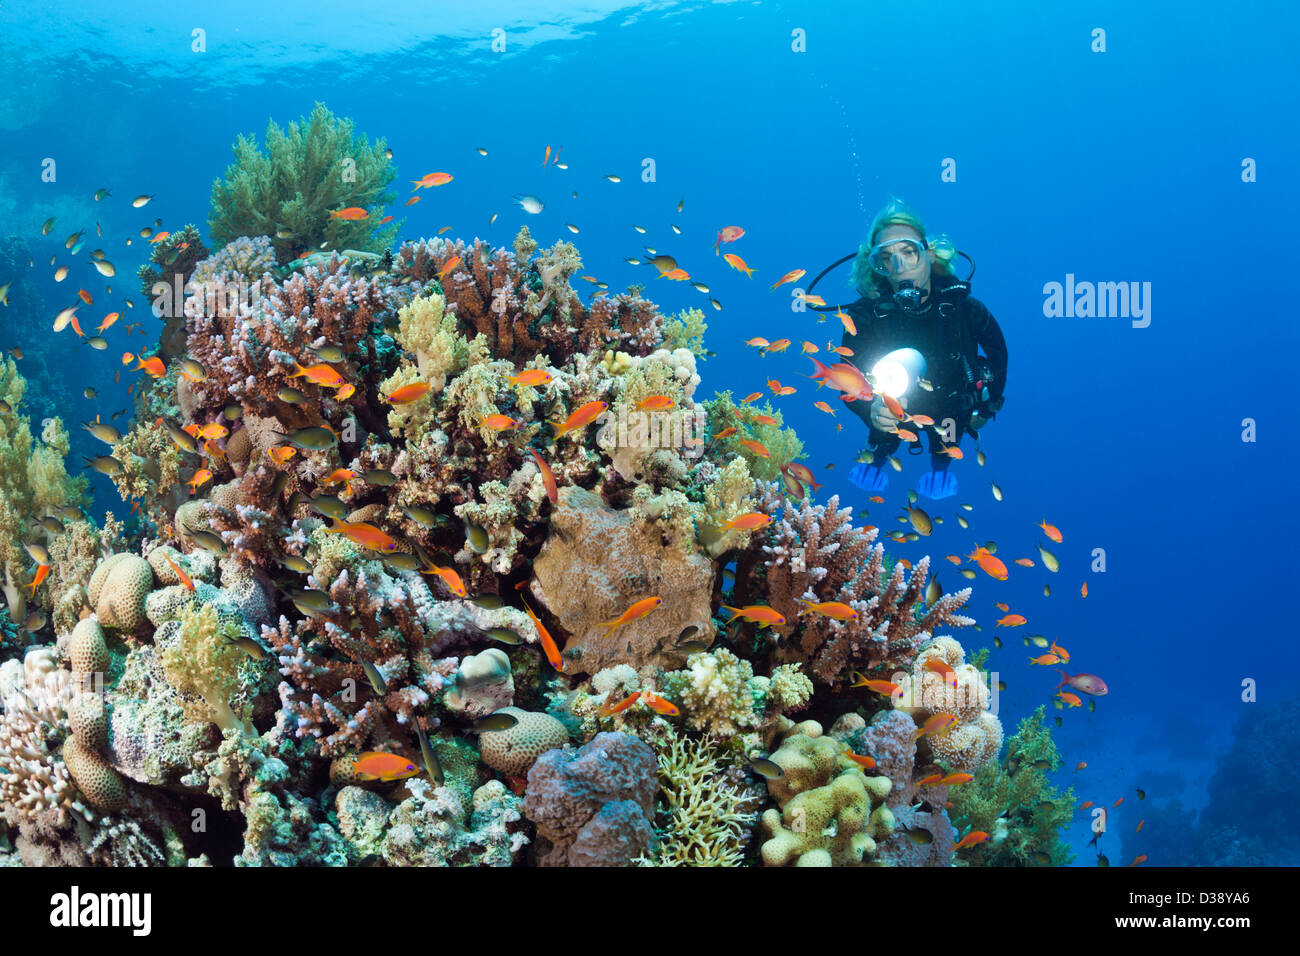 Scuba Diving in Red Sea, St. Johns, Red Sea, Egypt Stock Photo - Alamy